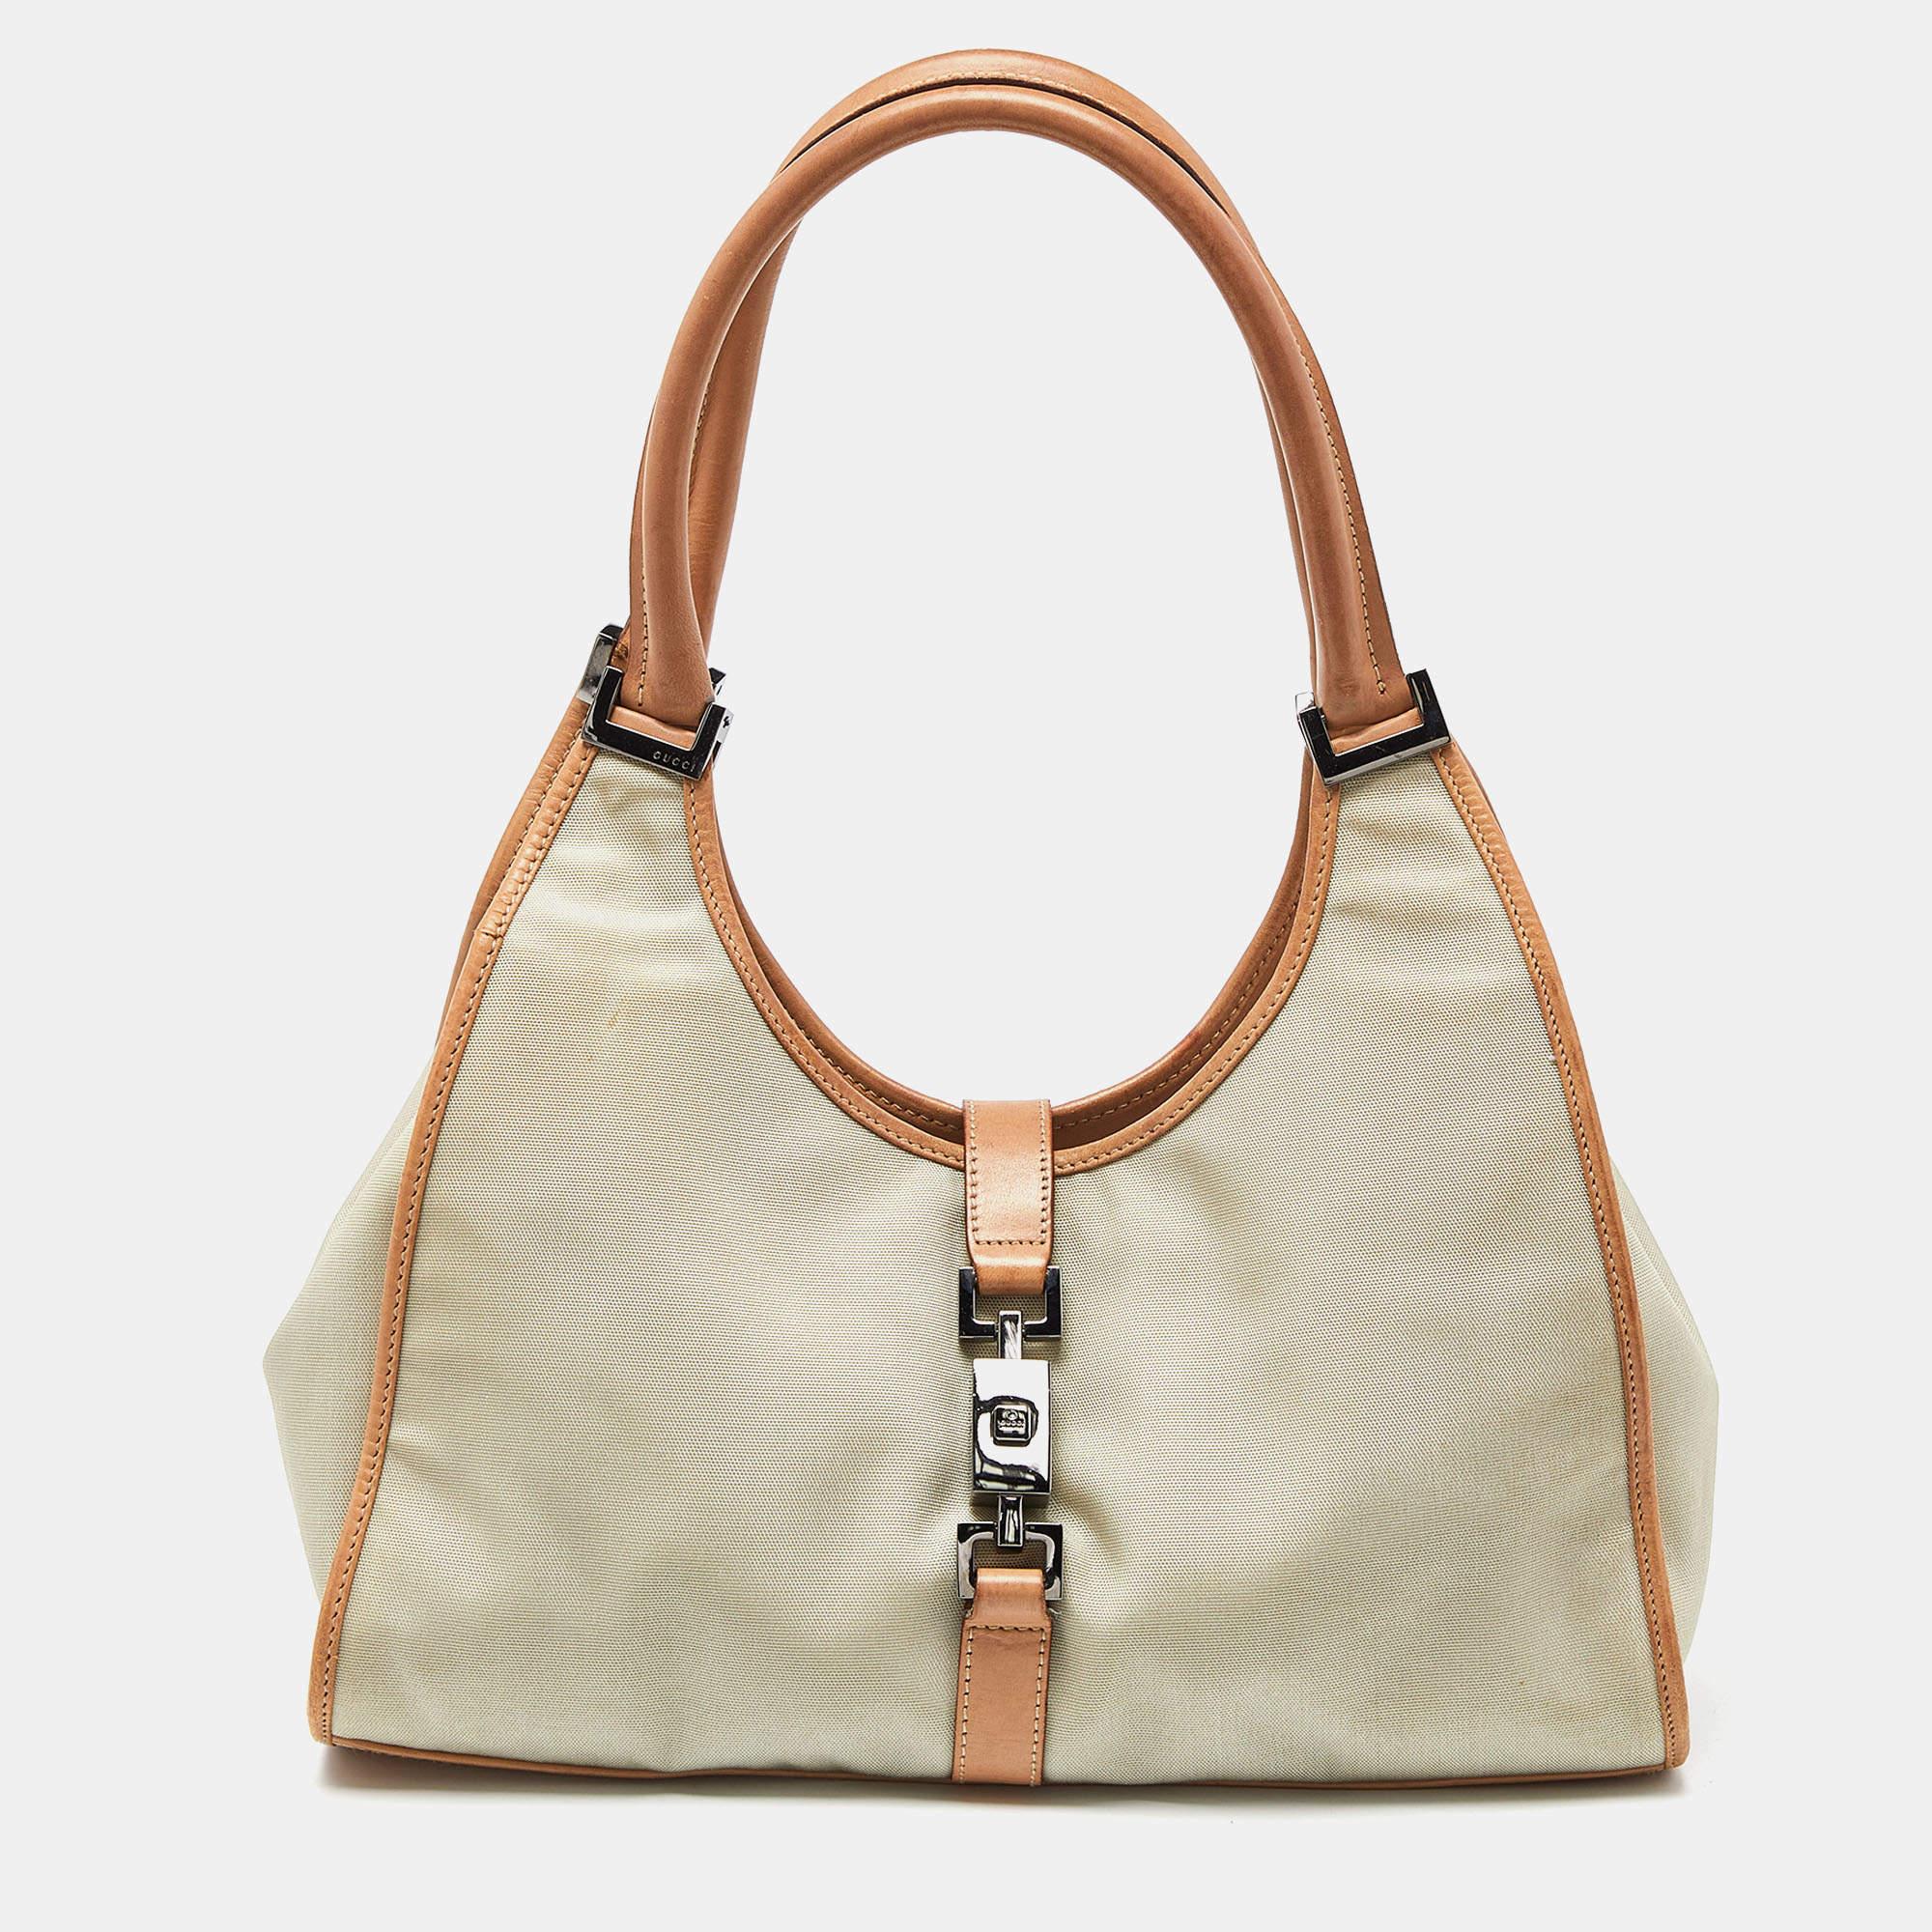 Gucci Beige/Tan Canvas and Leather Jackie Tote For Sale 8